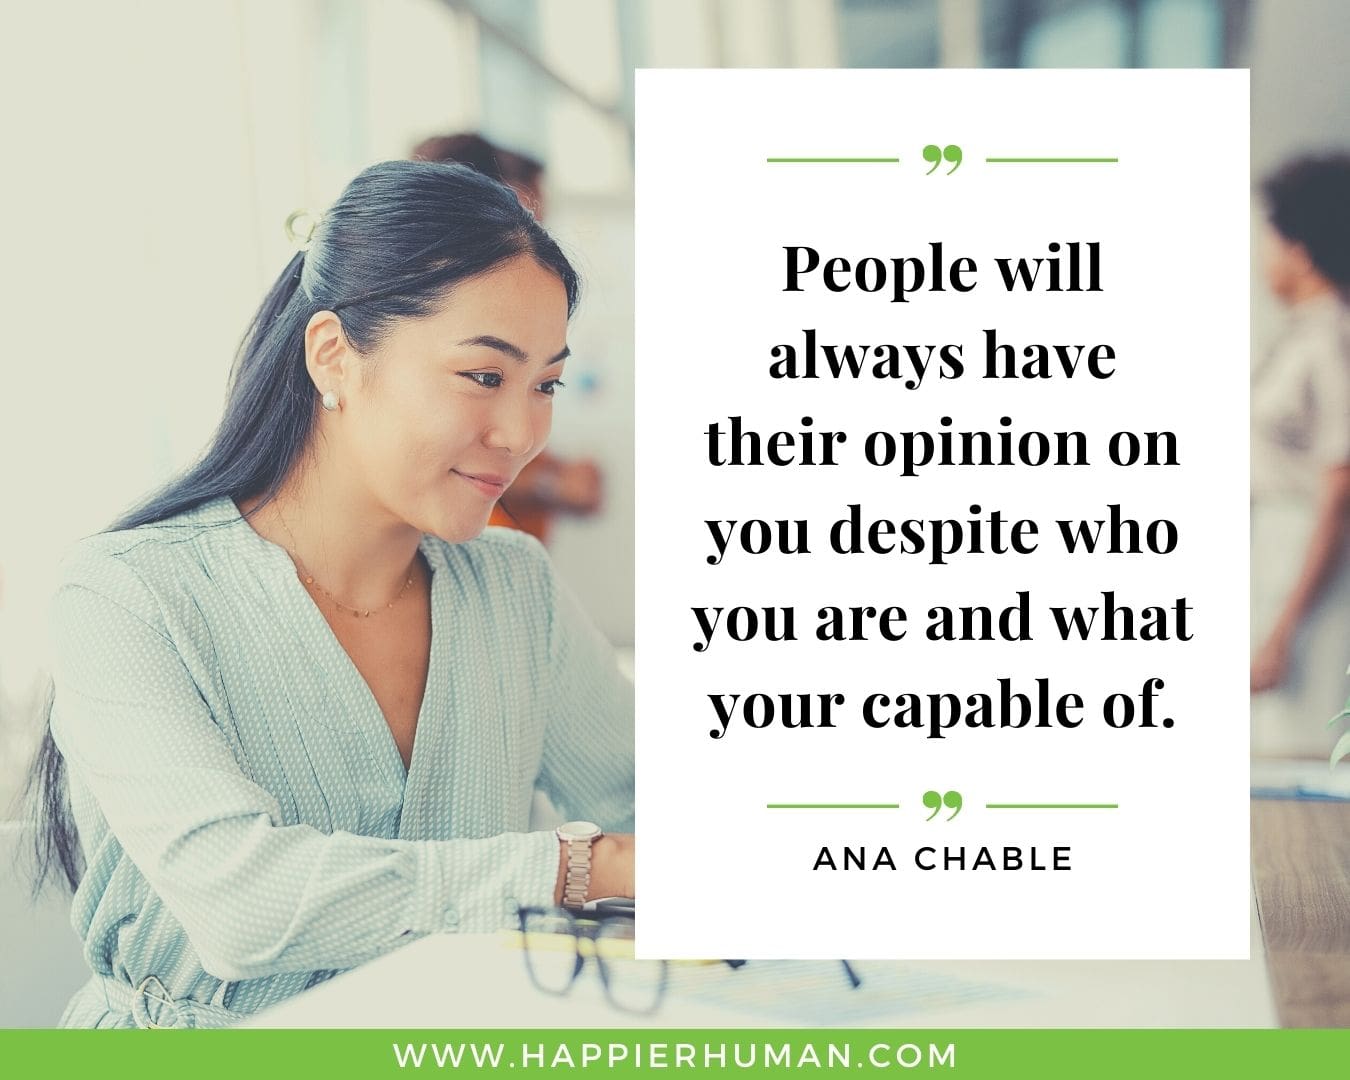 Haters Quotes - “People will always have their opinion on you despite who you are and what your capable of.” - Ana Chable